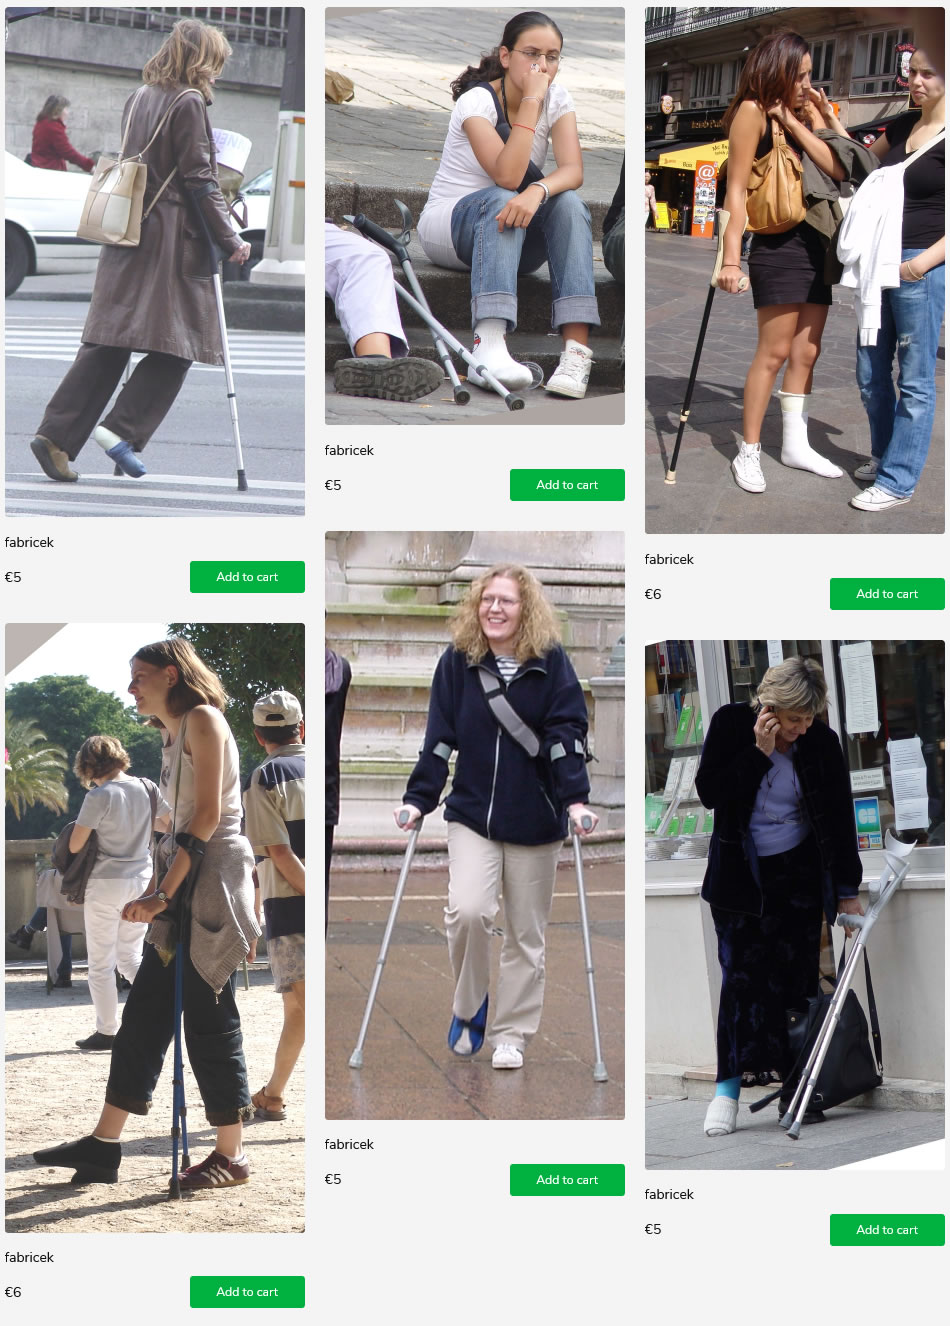 4 sets of women with leg injuries - with casts, bandages & orthopedic shoes. all on crutches.